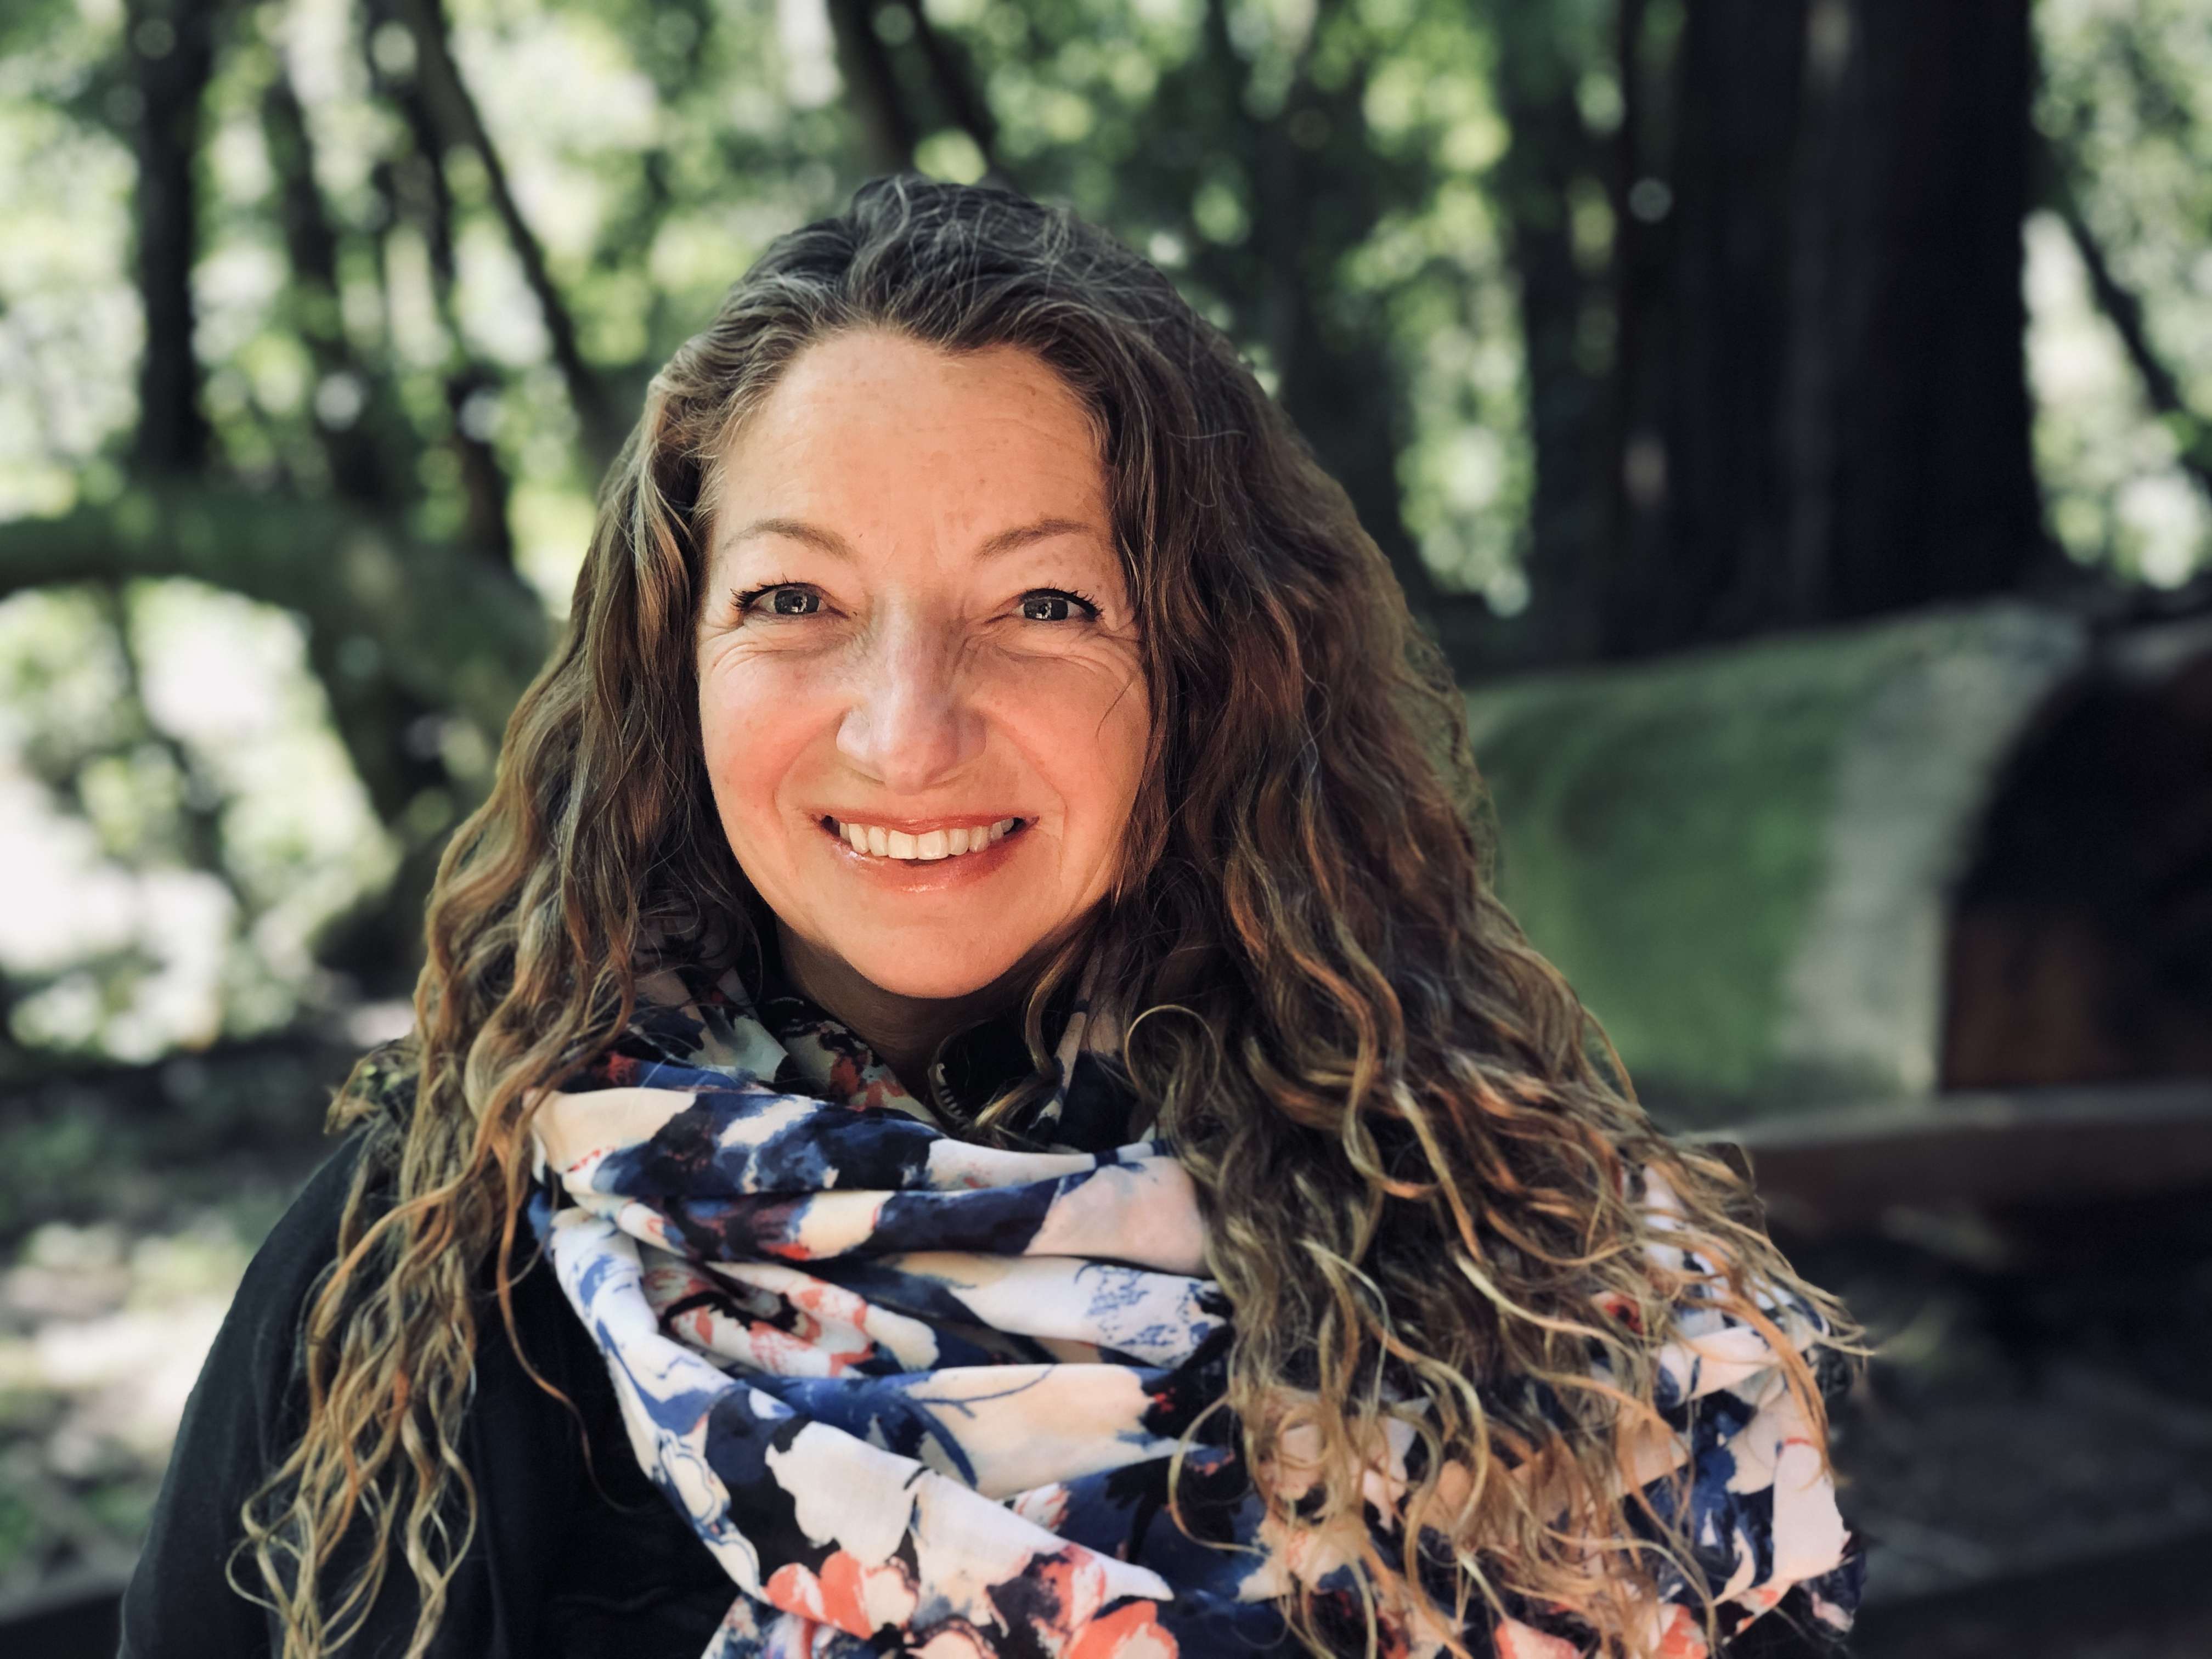 photo of Suzannah Bianco health coach and founder of powerful perimenopause is in the redwood forest wearing a multi colored scarf and black shirt